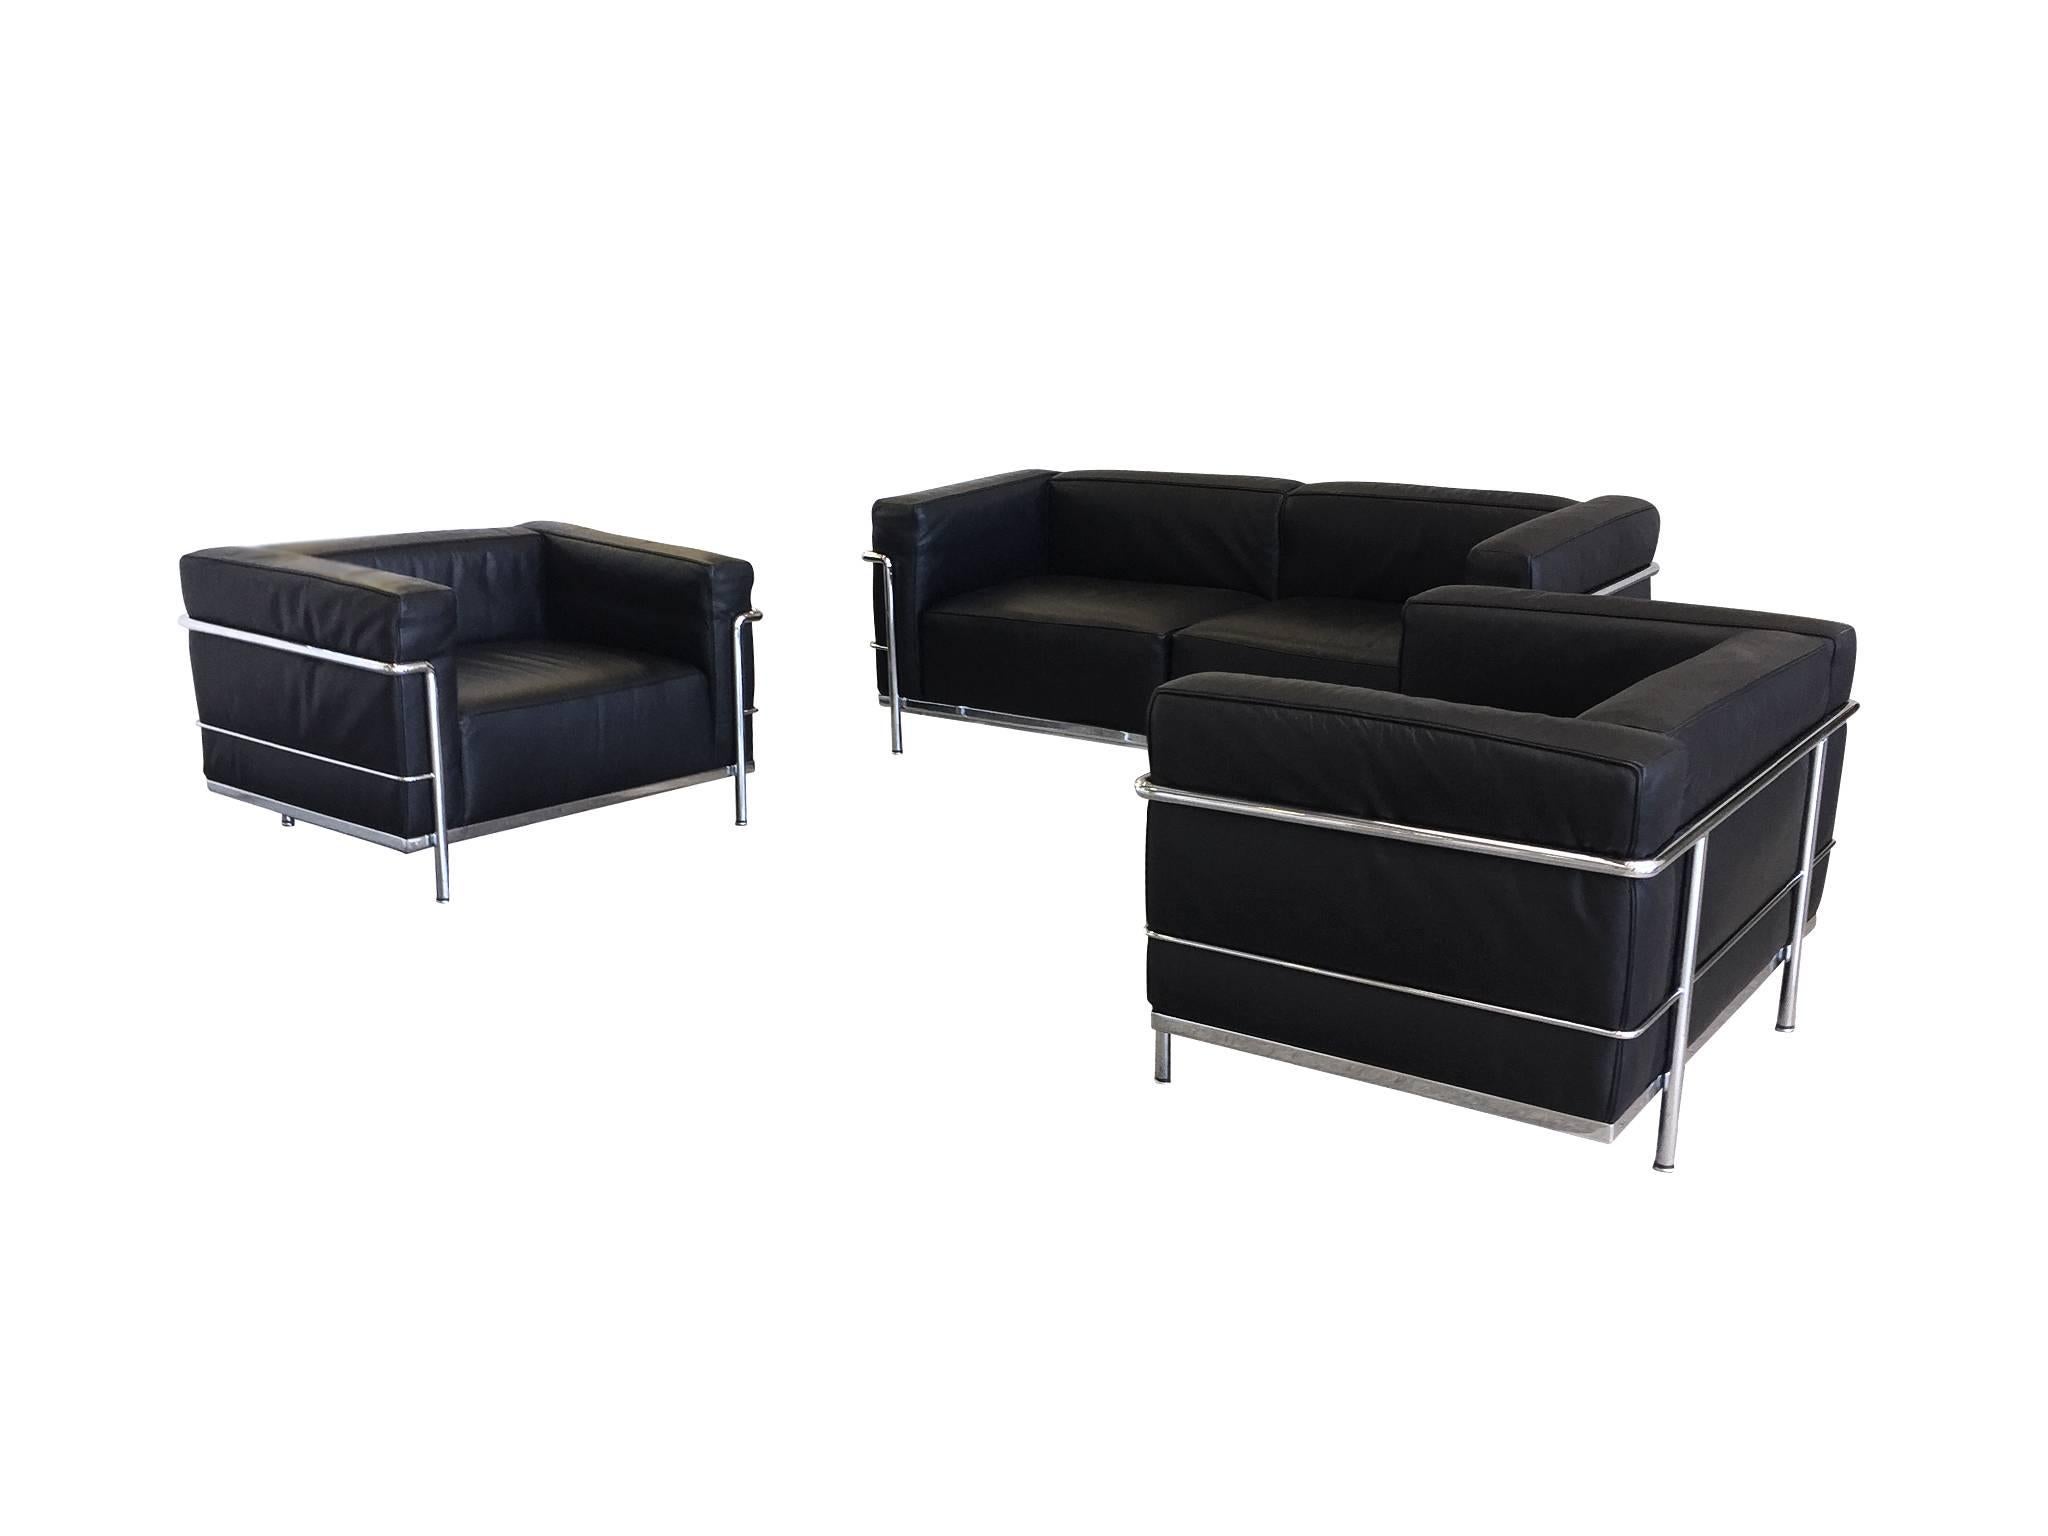 These Bauhaus LC3 sofa and club chairs have become iconic modern designs. Conceived by Le Corbusier, Pierre Jeanneret, and Charlotte Perriand and produced by Cassina, they are minimalist versions of traditional sofas and club chairs. The frame is